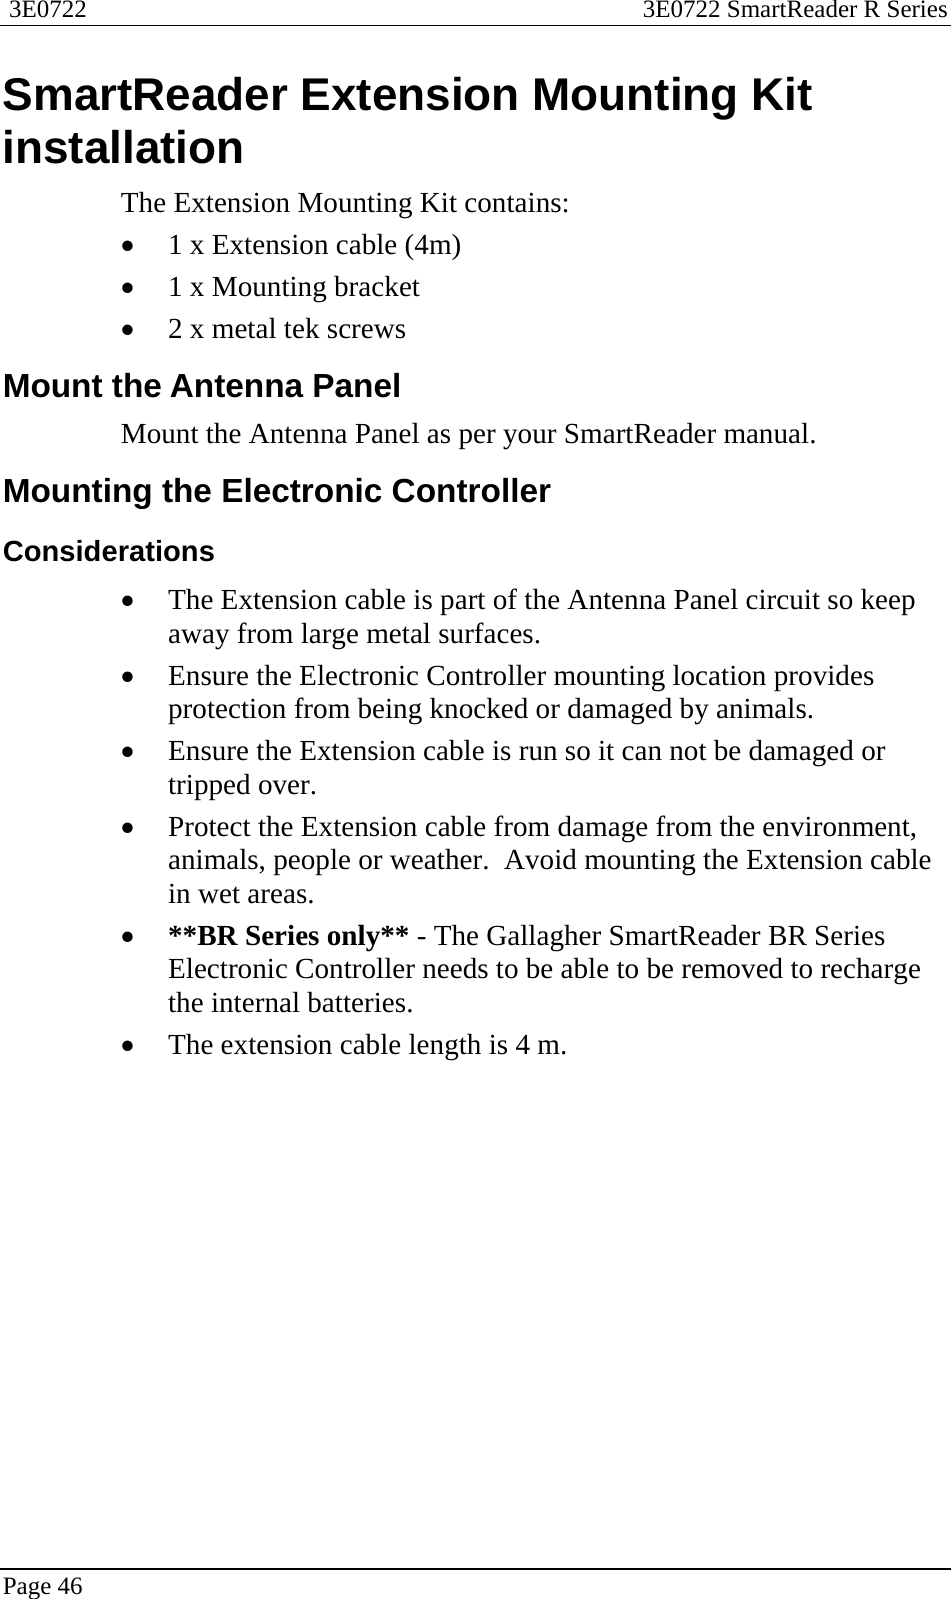  3E0722  3E0722 SmartReader R Series  Page 46  SmartReader Extension Mounting Kit installation The Extension Mounting Kit contains: • 1 x Extension cable (4m) • 1 x Mounting bracket • 2 x metal tek screws  Mount the Antenna Panel Mount the Antenna Panel as per your SmartReader manual.  Mounting the Electronic Controller Considerations • The Extension cable is part of the Antenna Panel circuit so keep away from large metal surfaces. • Ensure the Electronic Controller mounting location provides protection from being knocked or damaged by animals. • Ensure the Extension cable is run so it can not be damaged or tripped over. • Protect the Extension cable from damage from the environment, animals, people or weather.  Avoid mounting the Extension cable in wet areas. • **BR Series only** - The Gallagher SmartReader BR Series Electronic Controller needs to be able to be removed to recharge the internal batteries. • The extension cable length is 4 m.  